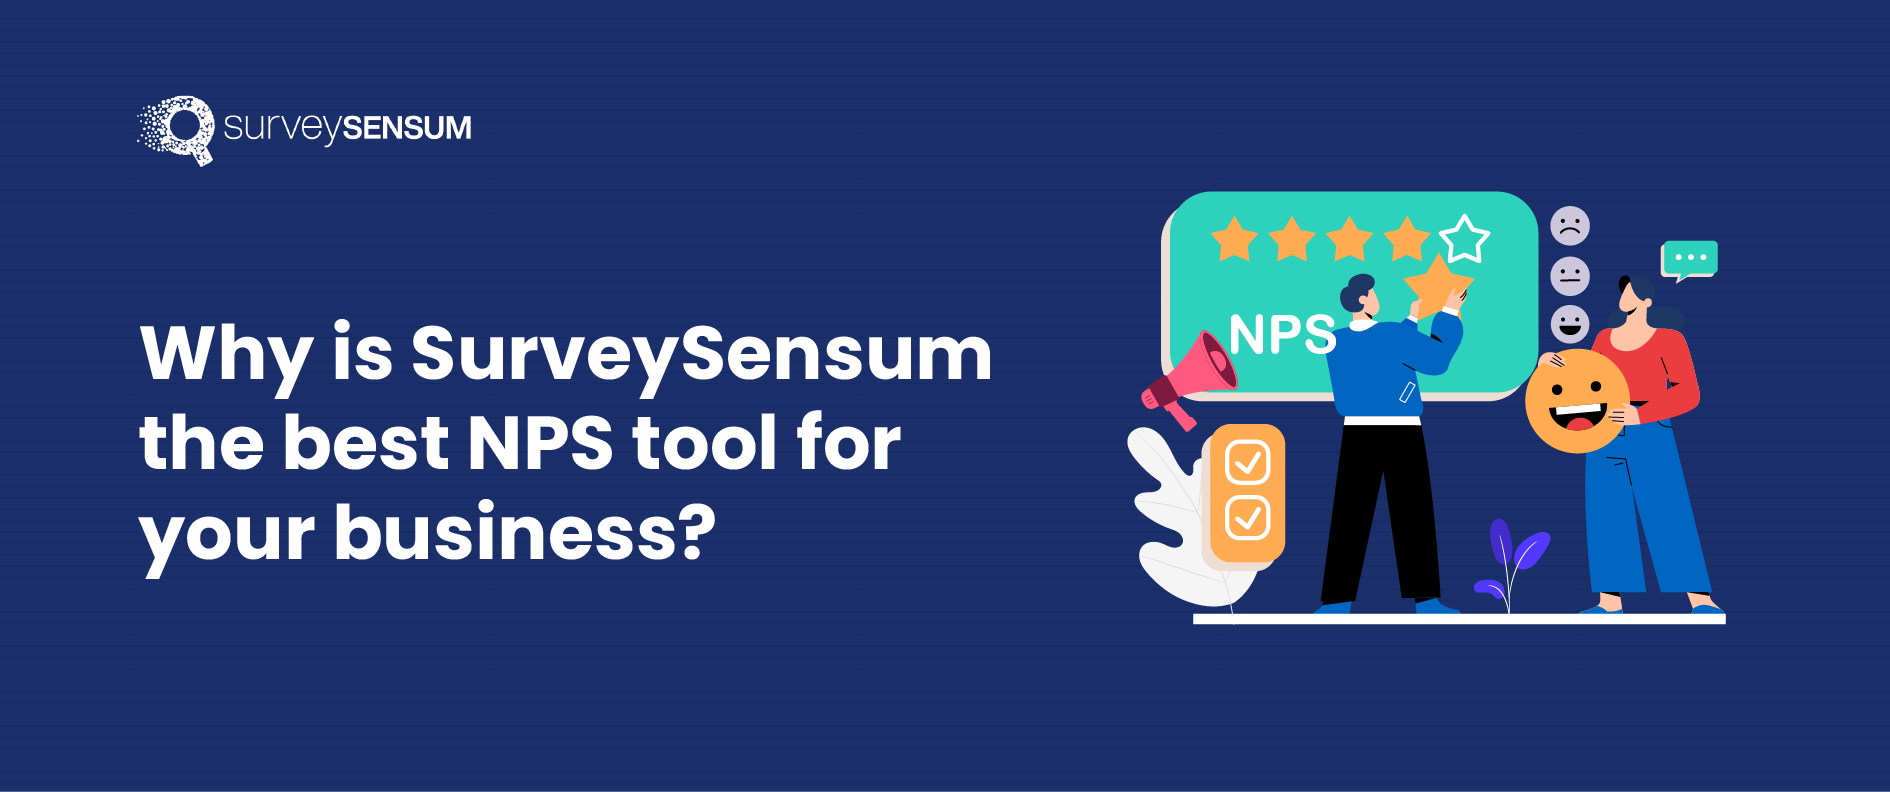 Why SurveySensum is the best NPS tool for your business-9b3d8e46